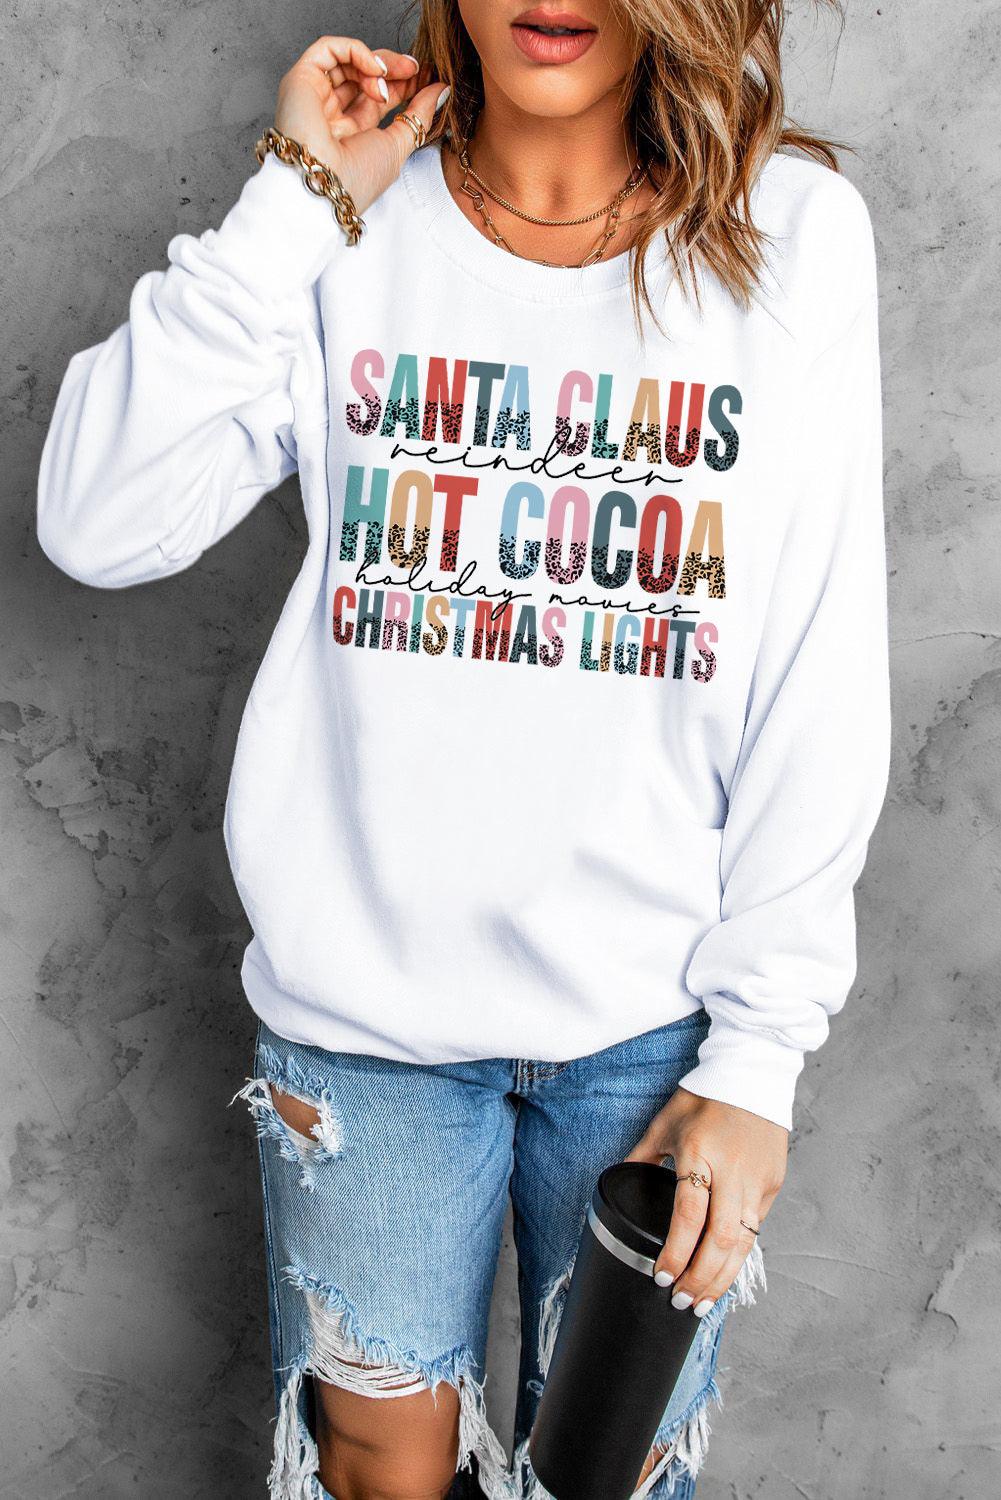 Father Christmas Embroidered Sweatshirt - L & M Kee, LLC